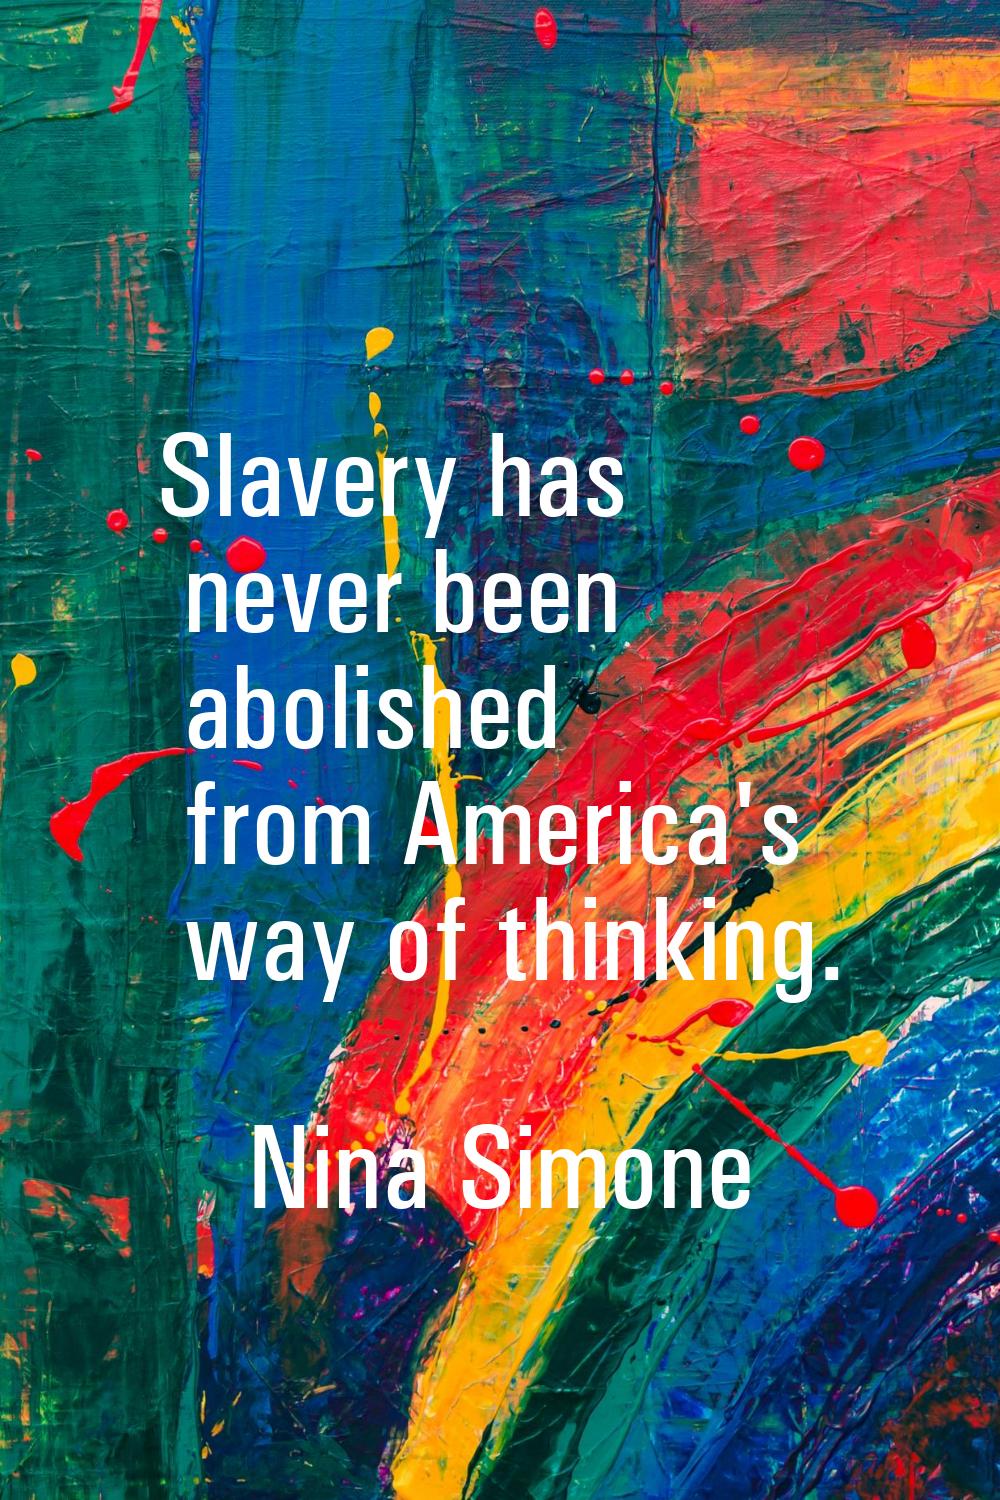 Slavery has never been abolished from America's way of thinking.